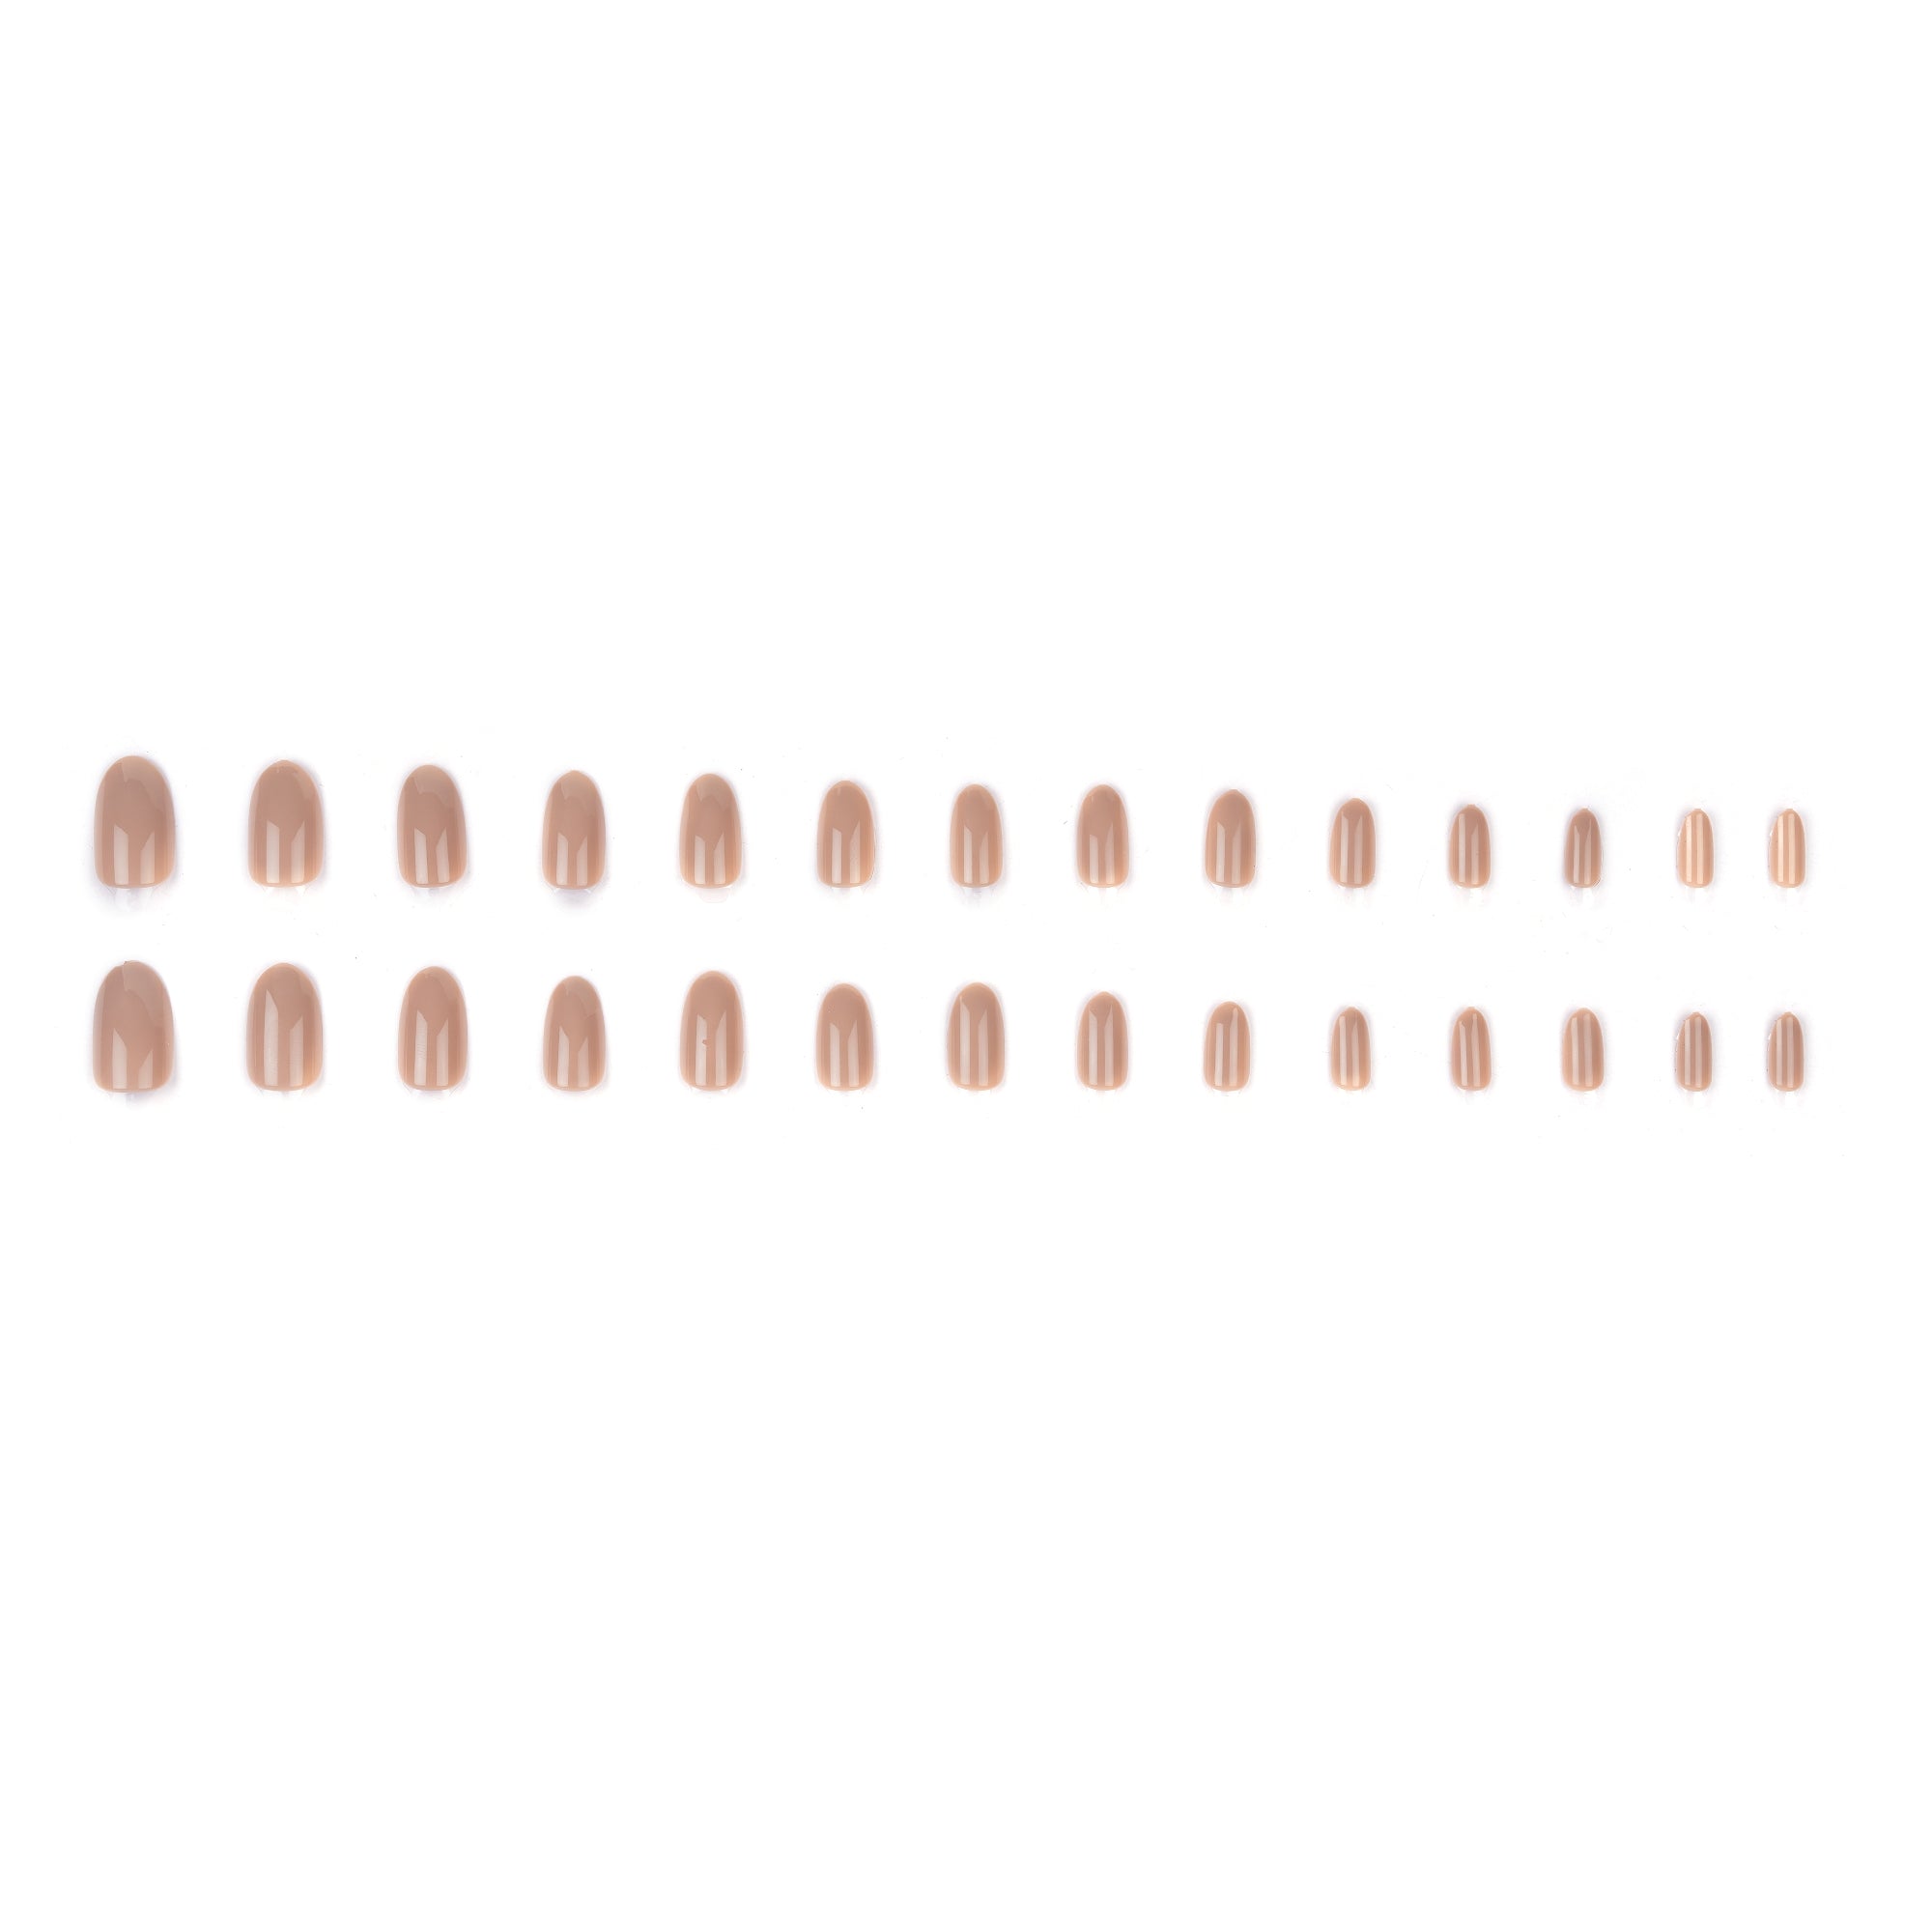 Lick Nails Rose Beige Acrylic Reusable Press on Nails With Application Kit, Combo of 2, 28 Pcs Per Pack